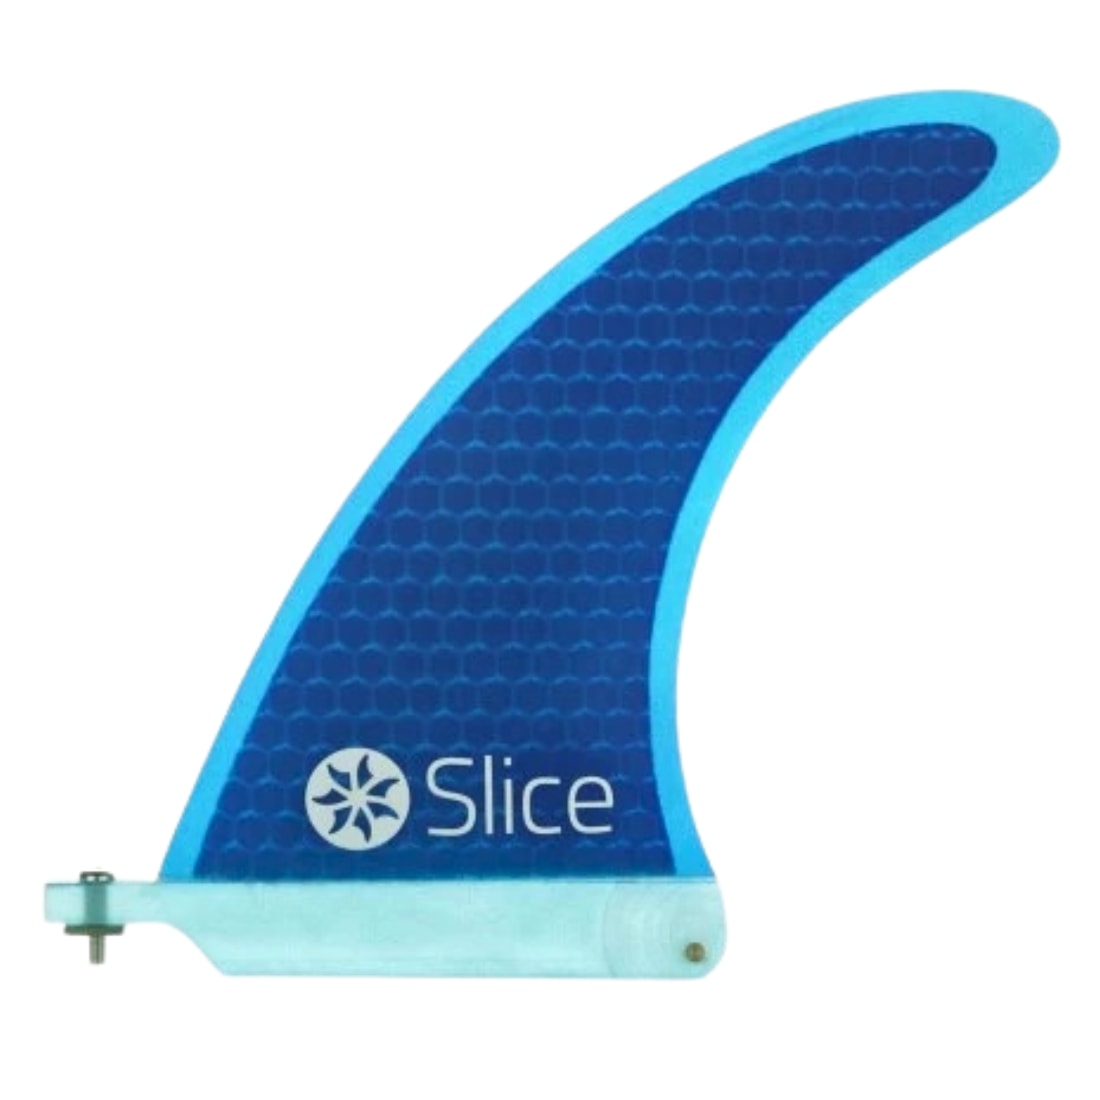 Northcore Rtm Hexcore 8" Longboard Surfbord Centre Fin - Blue - Longboard/Single Fin by Northcore 8 inch